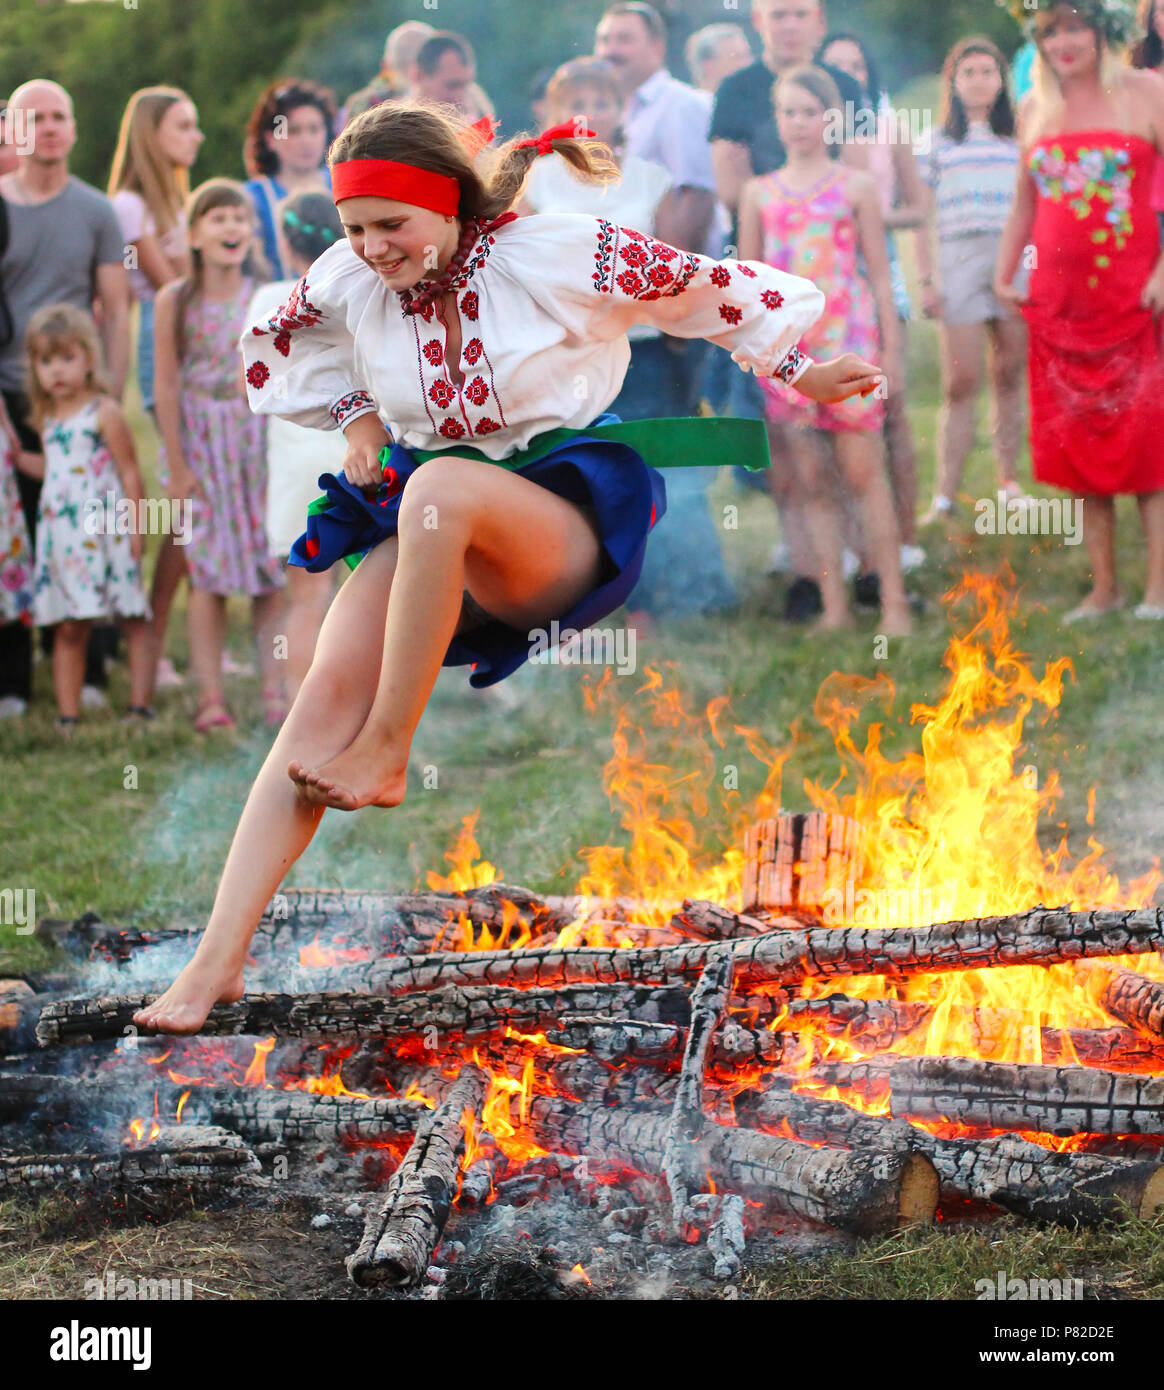 KYIV, UKRAINE - JULY 6, 2018: Young girl in national clothing jumps over the flames of bonfire during the traditional Slavic celebration of Ivana Kupa Stock Photo